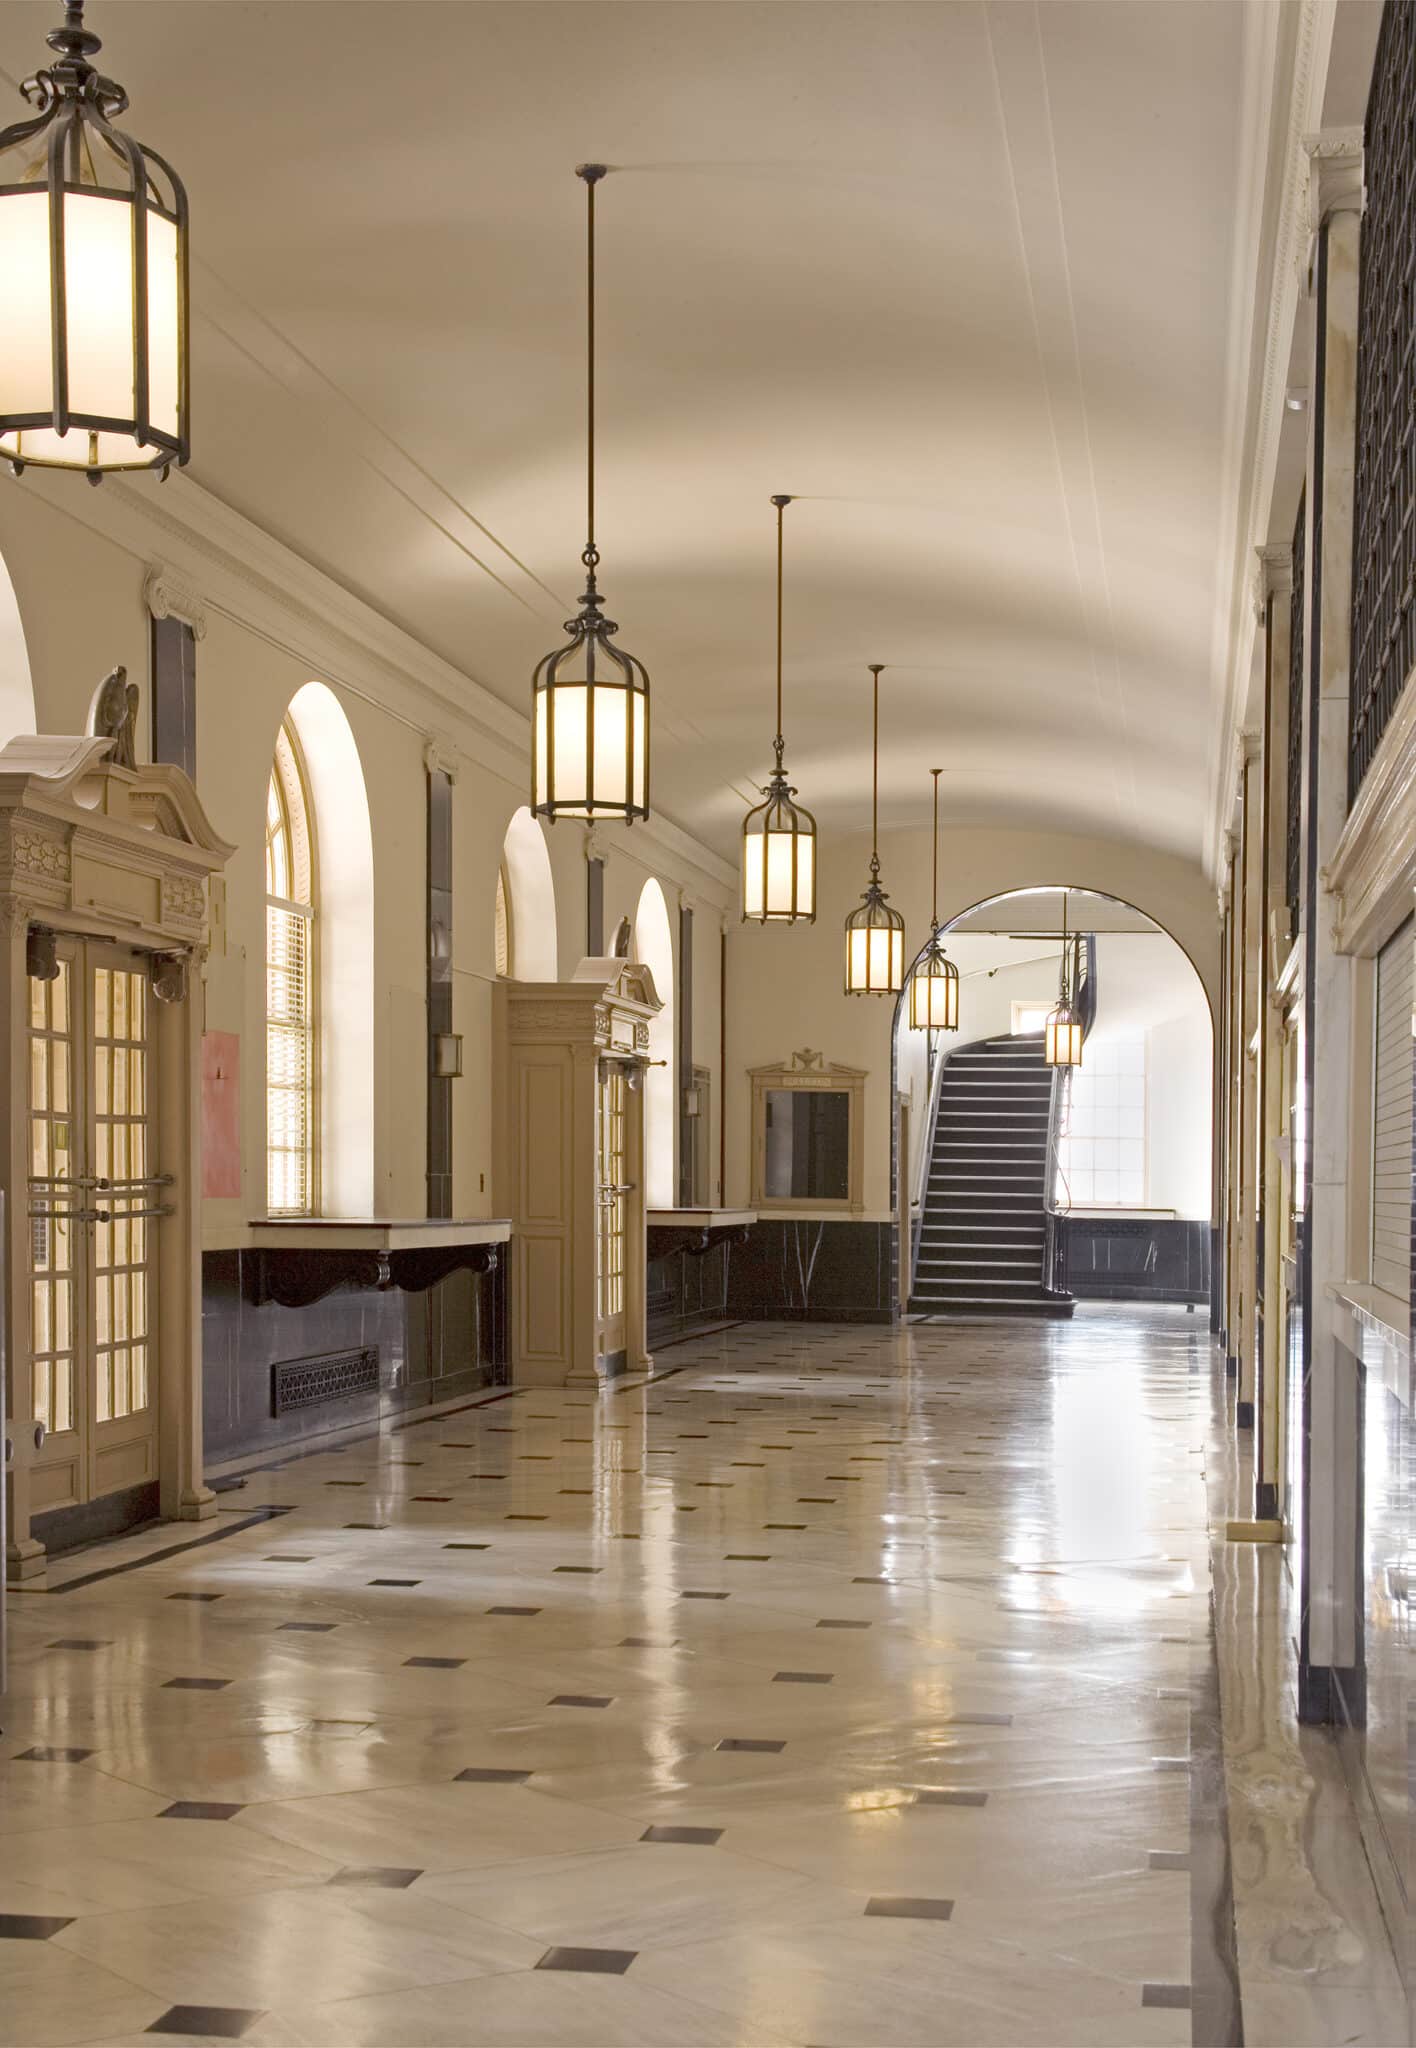 interior hallway of u.s. post office and courthouse designed by trivers architectural firm